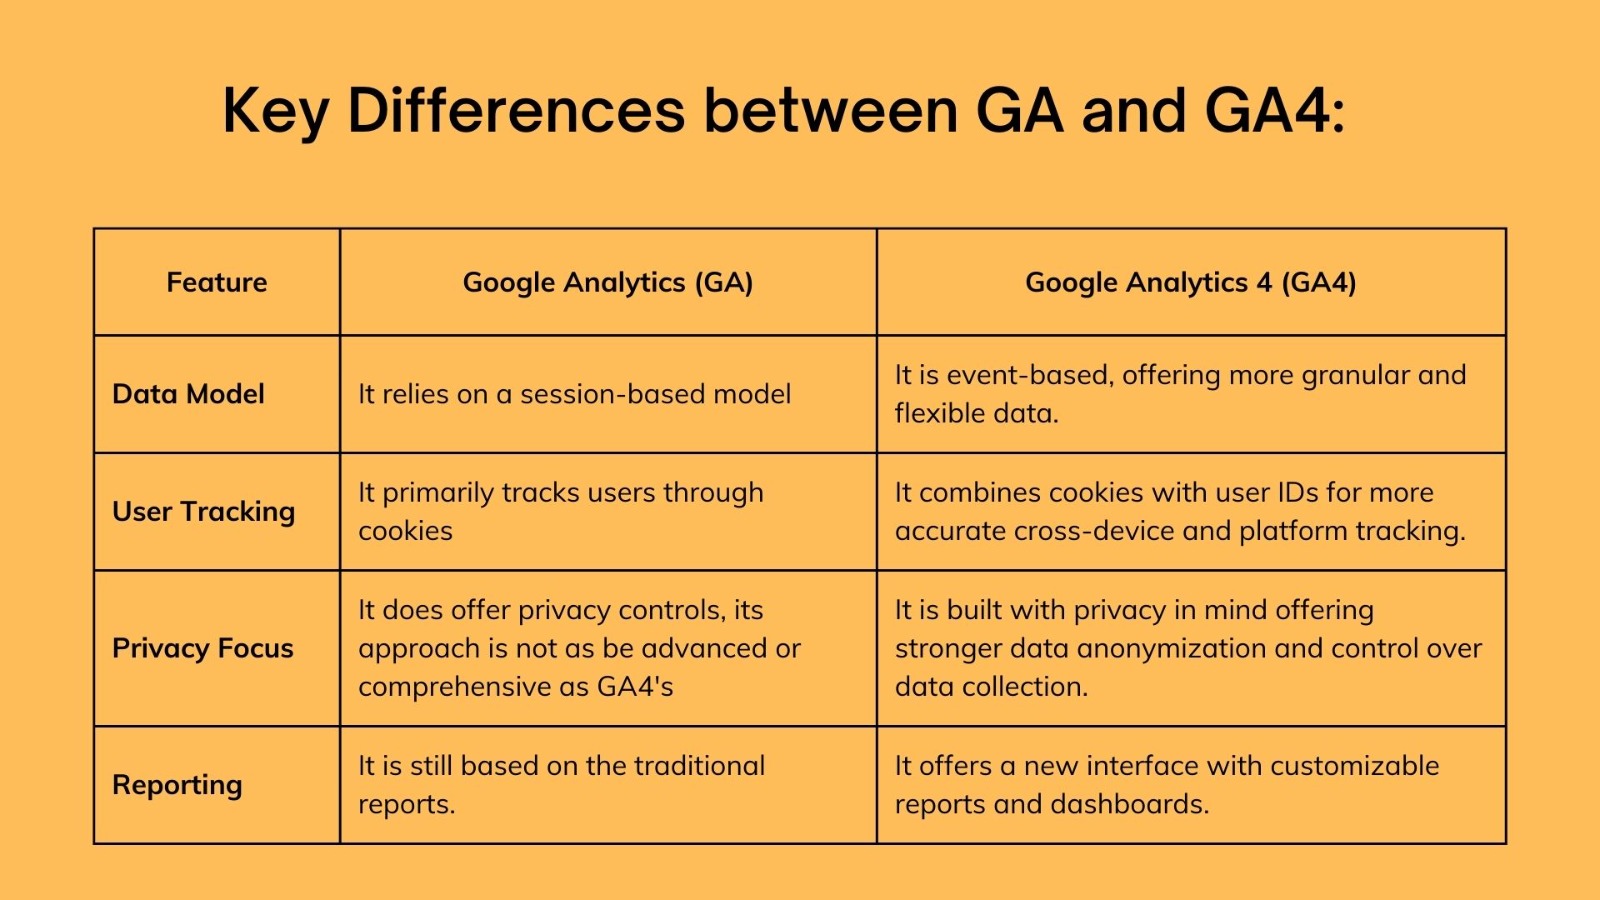 GA4, Google Analytics 4, Google, website, app analysis, pageviews, sessions, traditional metrics, digital property, digital advertising, insights, screen views, digital advertising, GA4 events, button clicks, session-based mode, granular data, flexible data, cross-device, platform tracking, anonymization, data collection, reports, dashboard, user engagement, blog posts, social media, traditional analytics, micro-conversions, ad campaigns, data revolution, e-commerce, wishlist, email campaign, IT service,